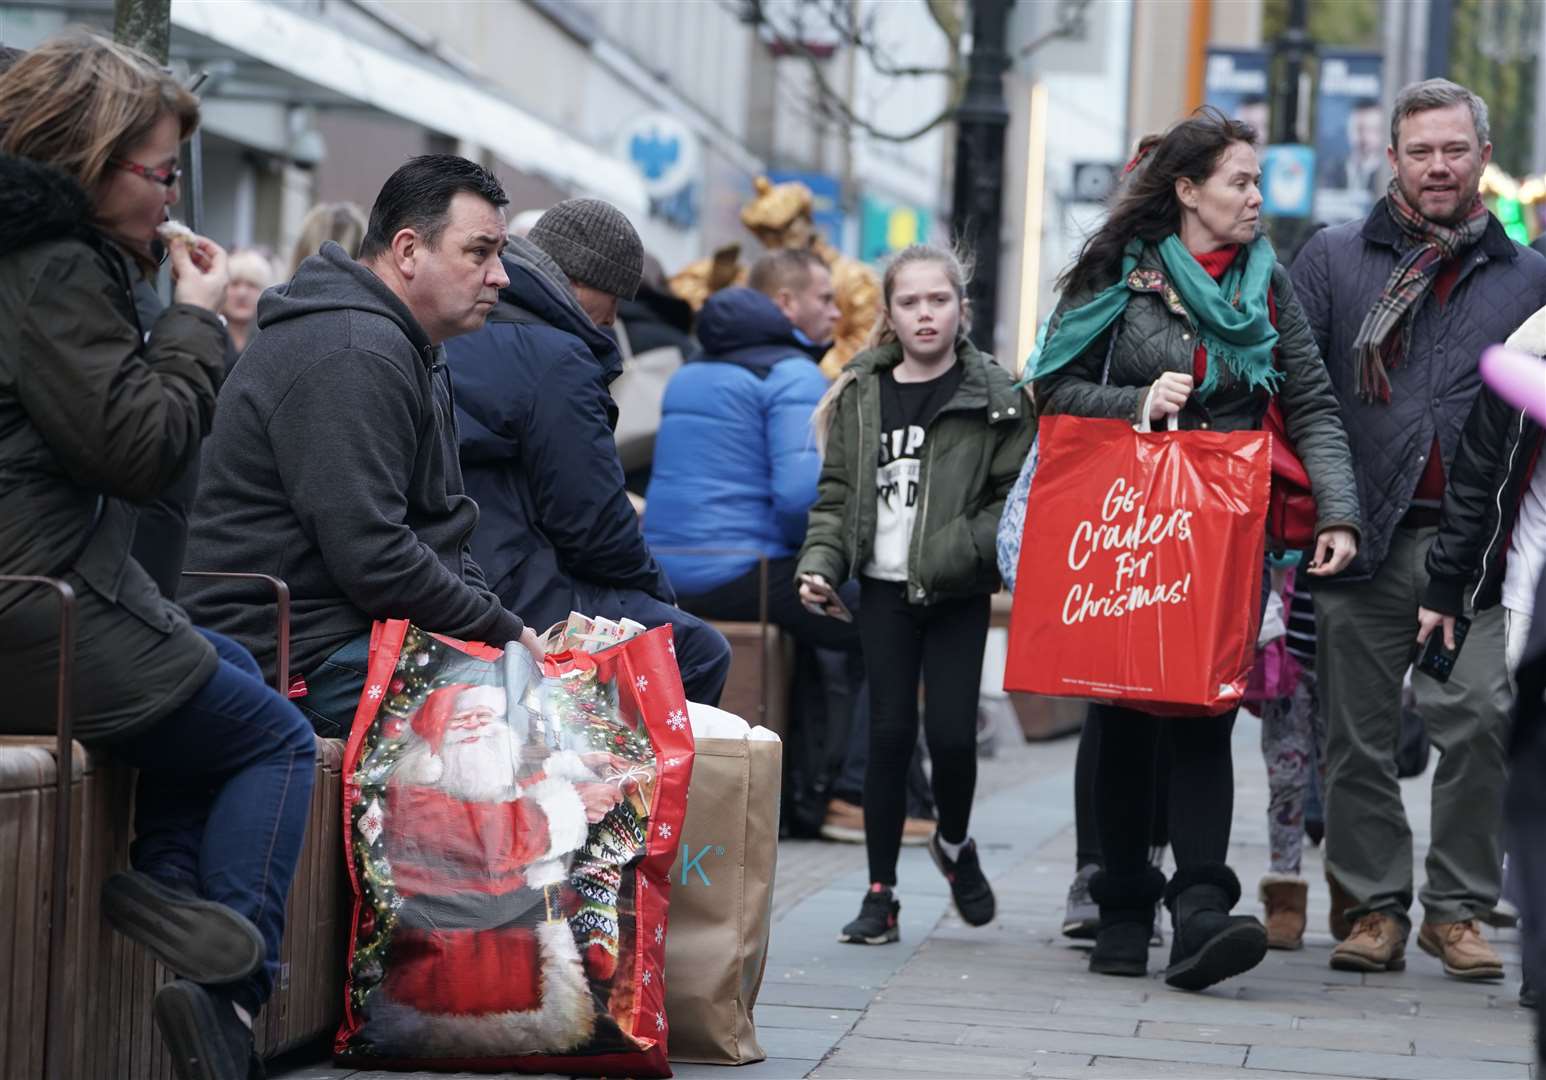 Business leaders felt the lockdown would be a retail ‘nightmare’ in the run up to Christmas (Owen Humphreys/PA)